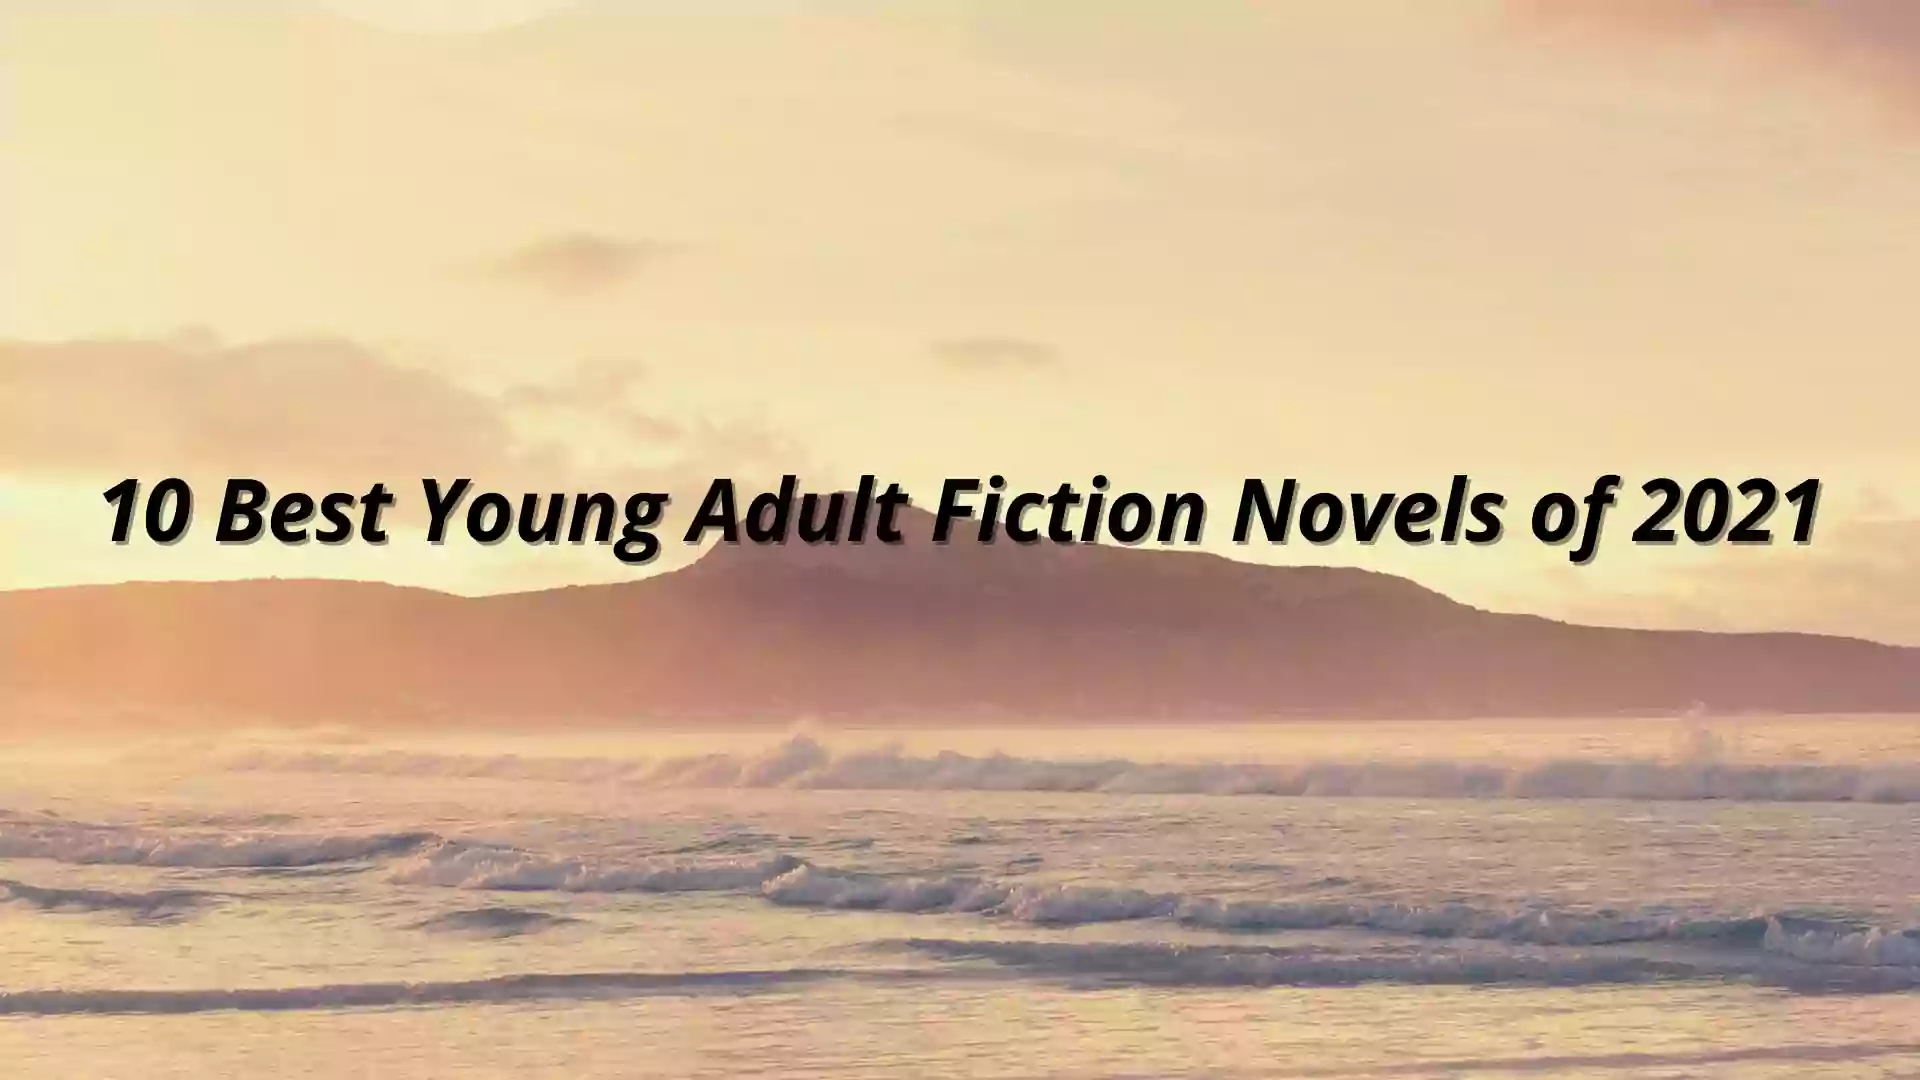 10 Best Young Adult Fiction Novels of 2021